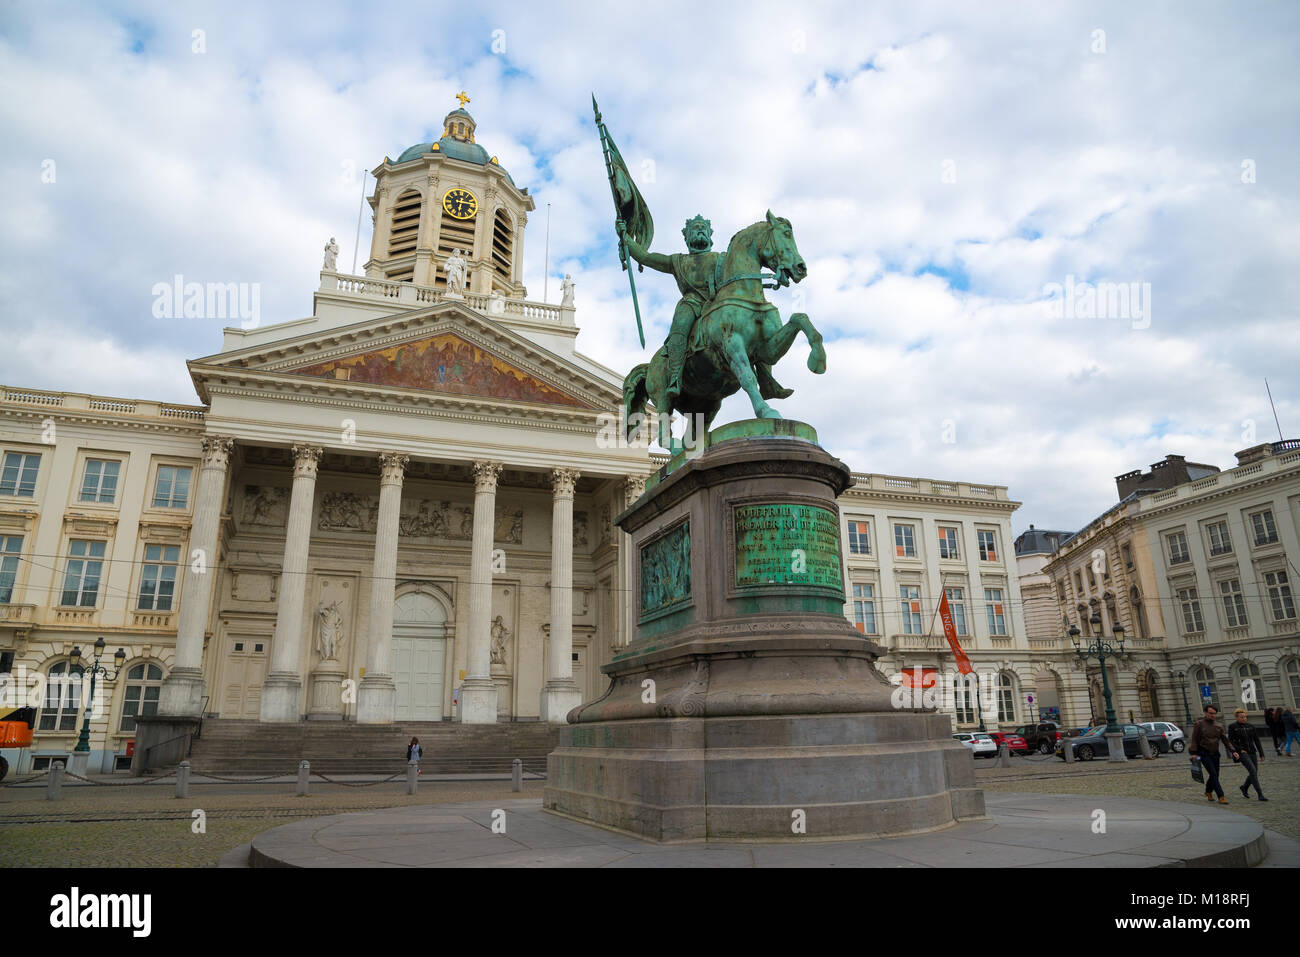 Brussels, Belgium - April 22, 2017: Godfrey of Bouillon statue and Church of Saint Jacques-sur-Coudenberg in Royal Square, Brussels, Belgium. Stock Photo